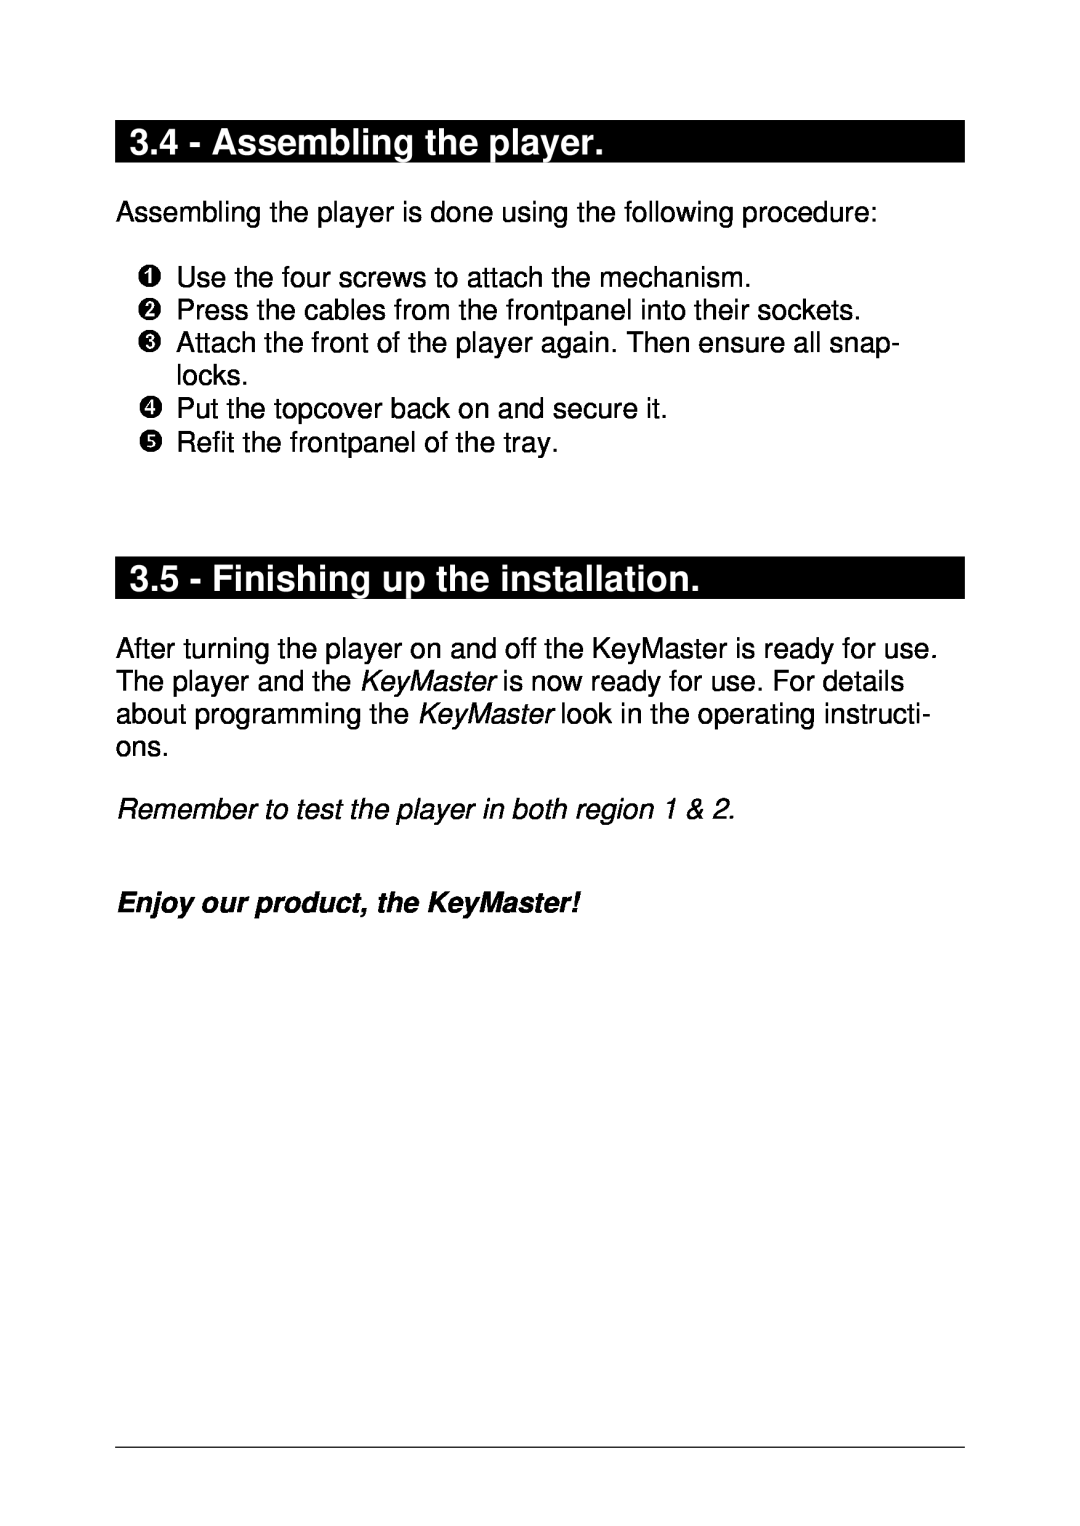 Panasonic 98RV1 installation manual Assembling the player, Finishing up the installation, Enjoy our product, the KeyMaster 